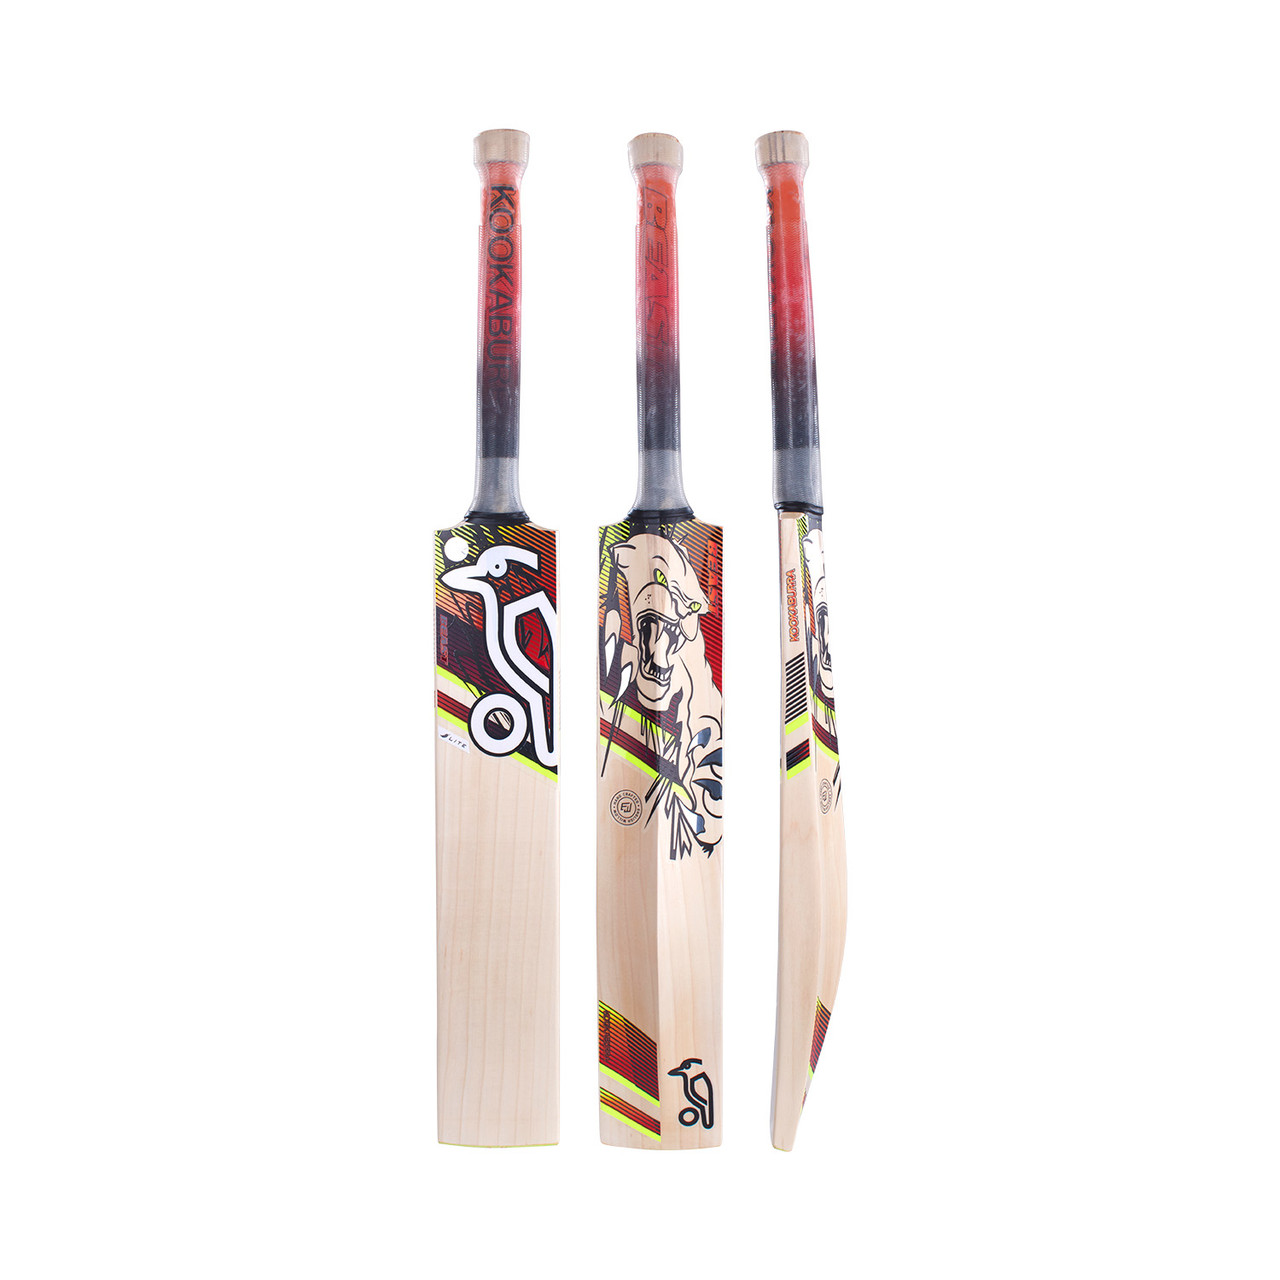 Buy SM Cricket Kit Cricket Kit Online at Best Prices in India - Cricket